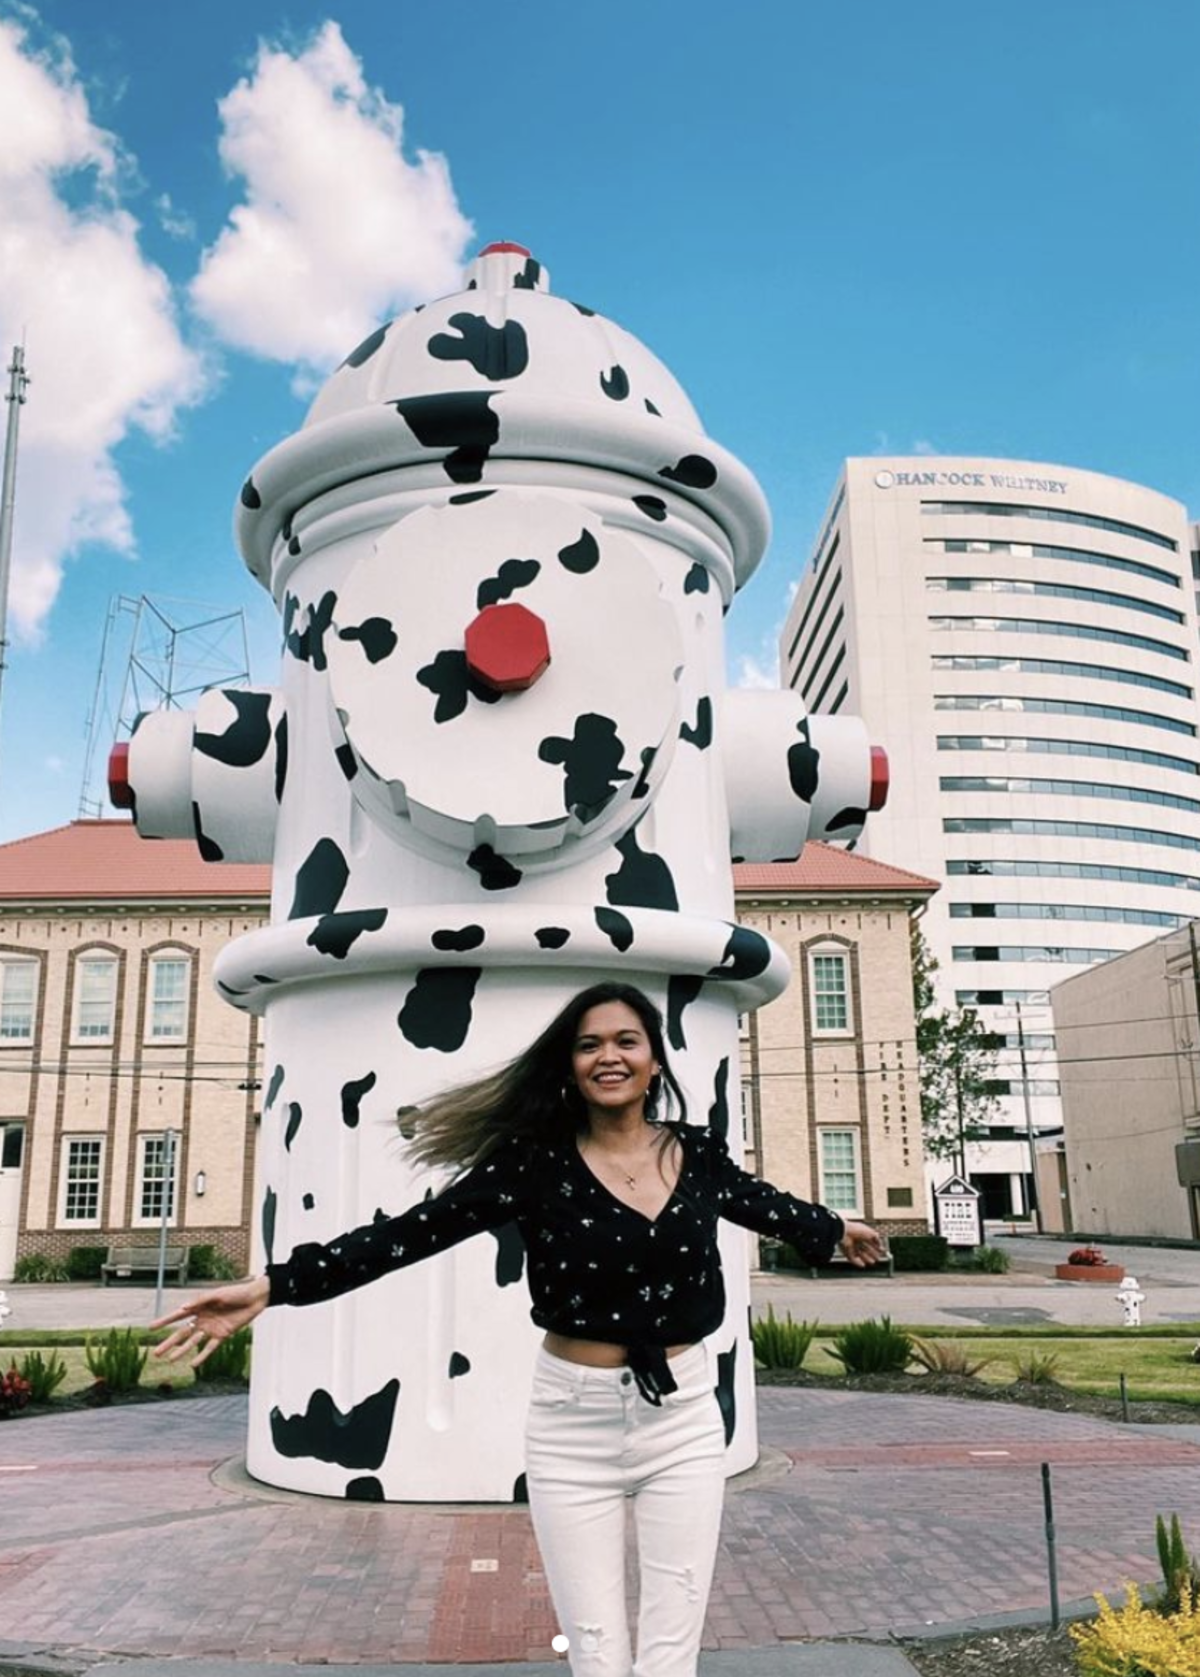 A visitor poses in front of the Dalmatian-inspired fire hydrant at the Fire Museum of Texas.